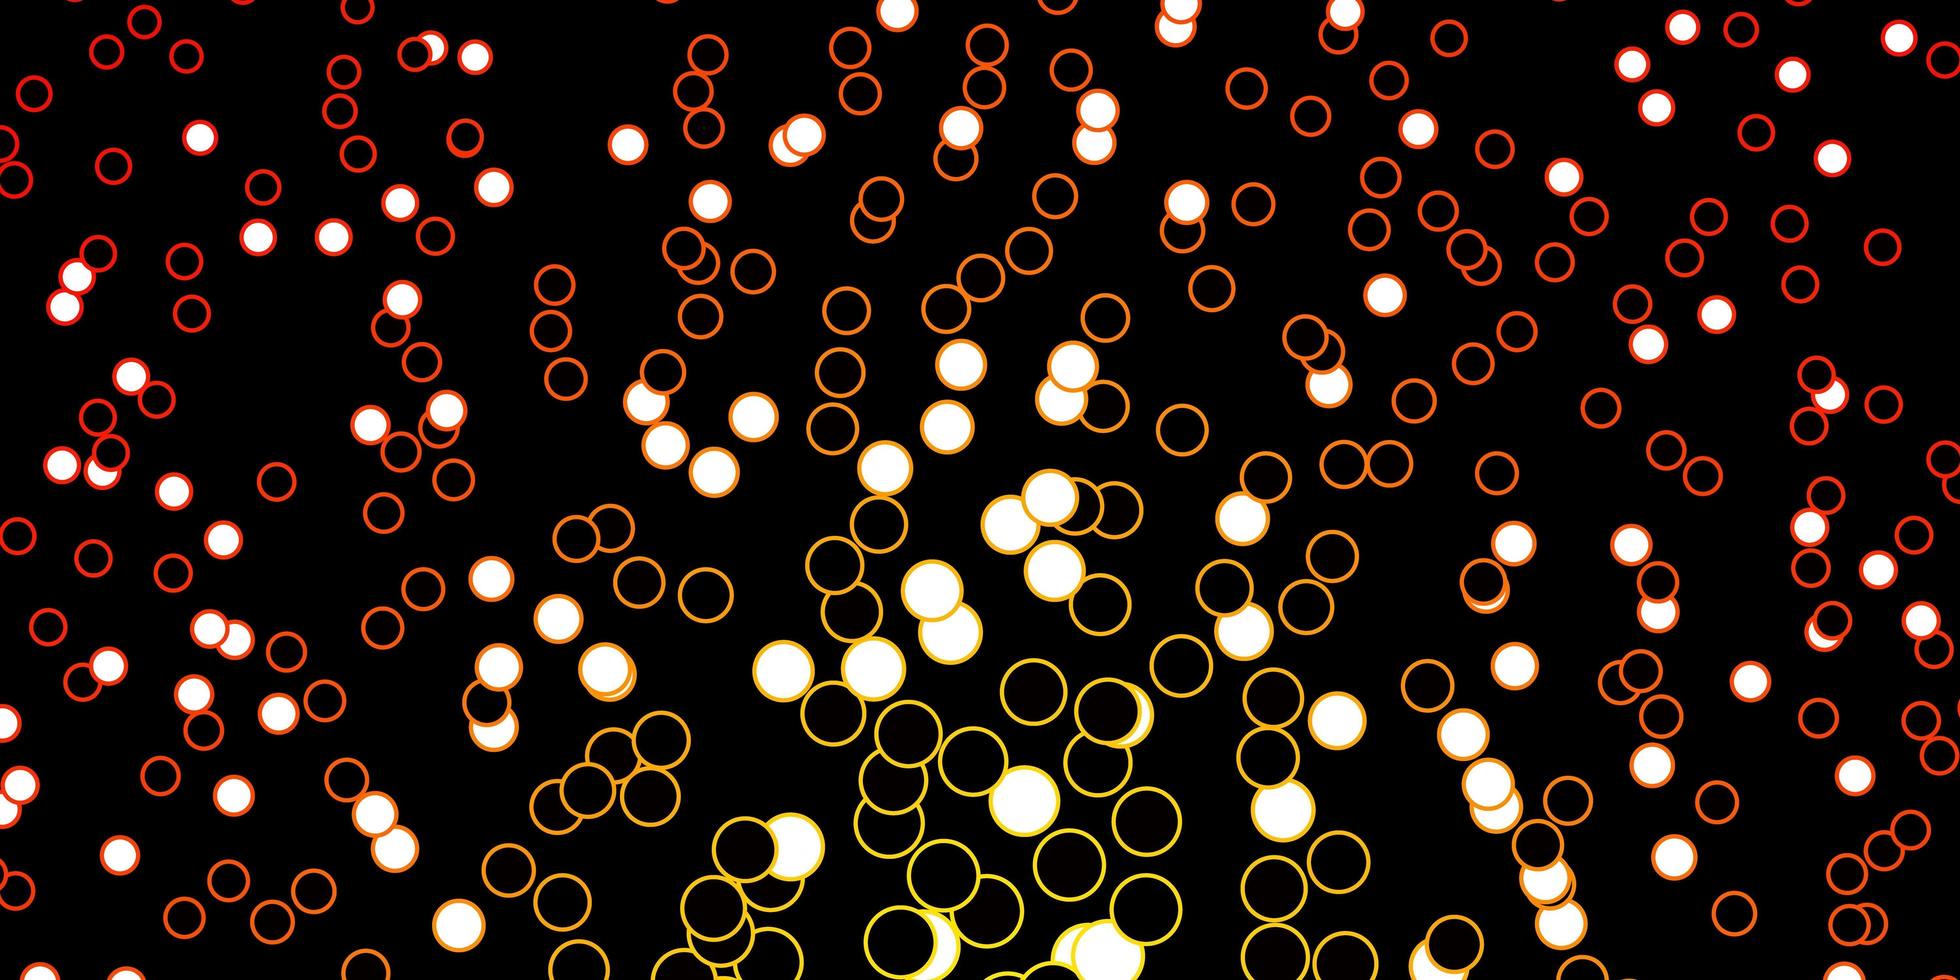 Dark Orange vector pattern with circles Abstract illustration with colorful spots in nature style Design for your commercials